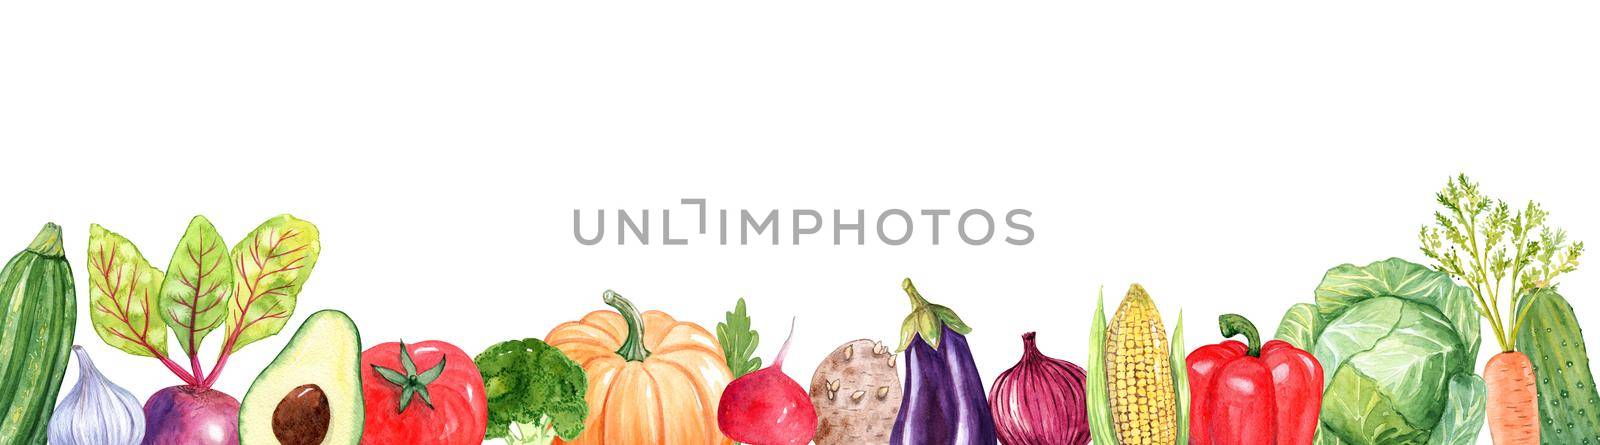 Watercolor various vegetables banner isolated on white background by dreamloud